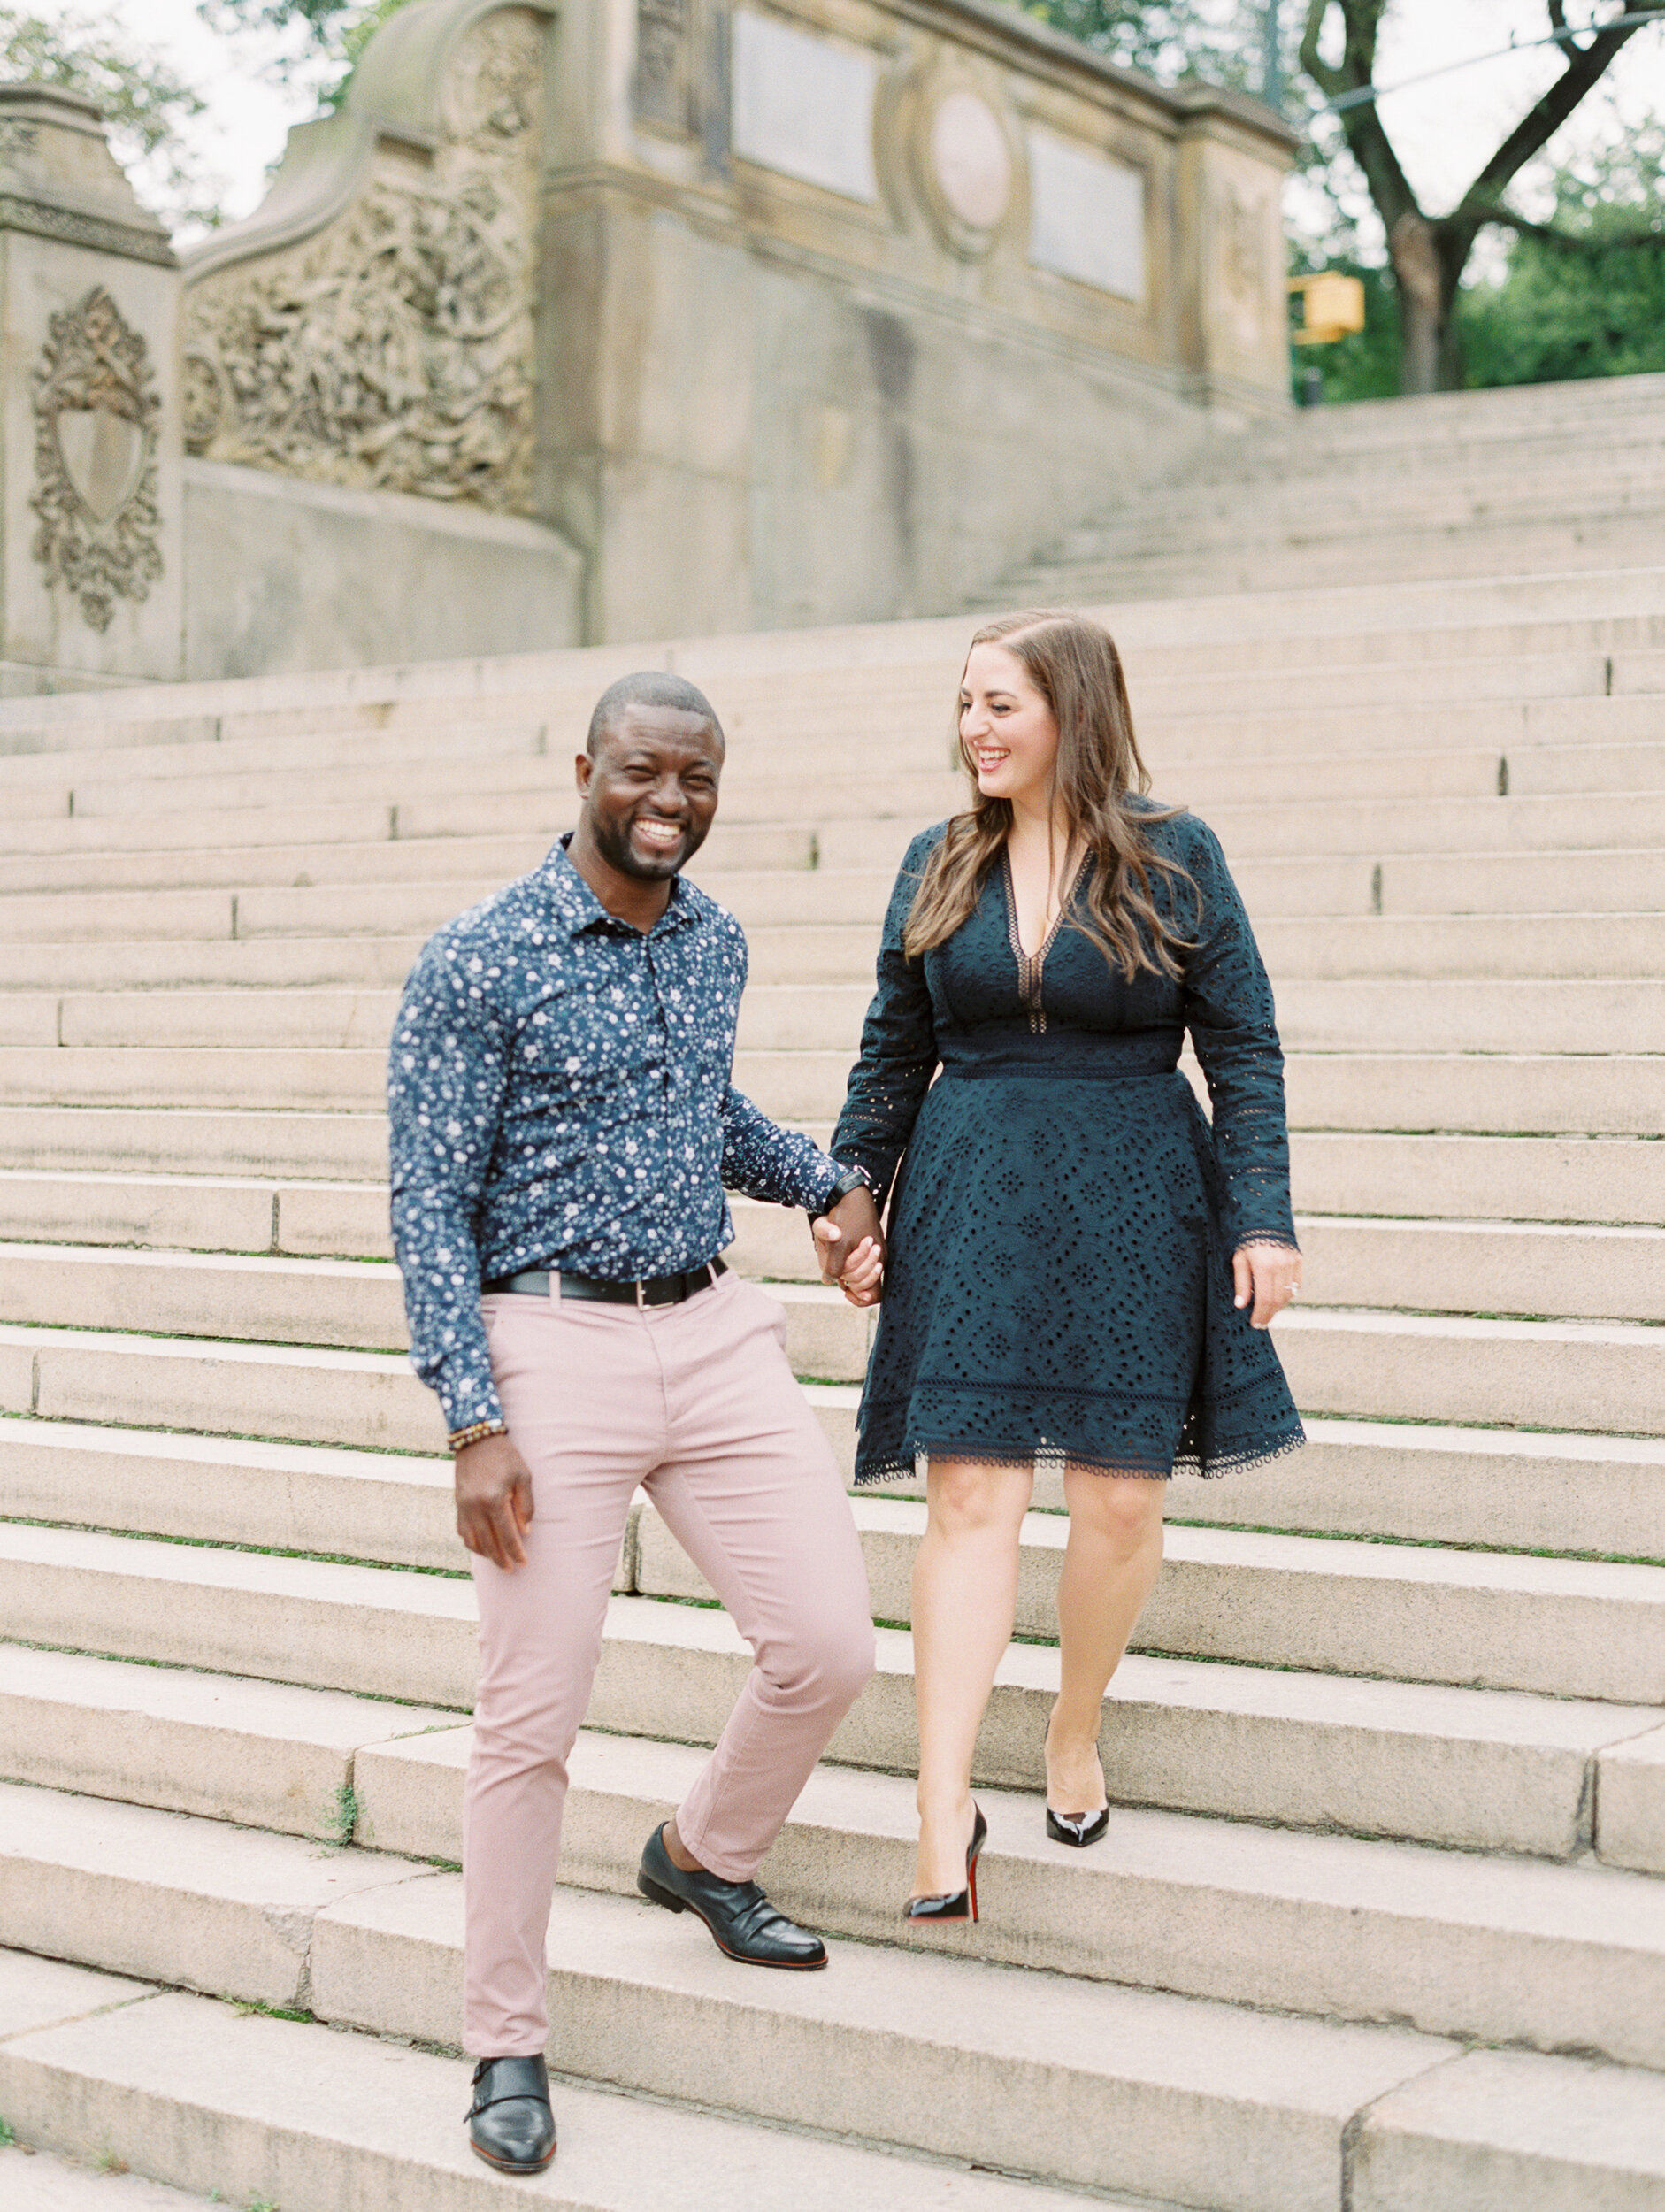 Central Park Engagement Photos at Bethesda Terrence in Central Park